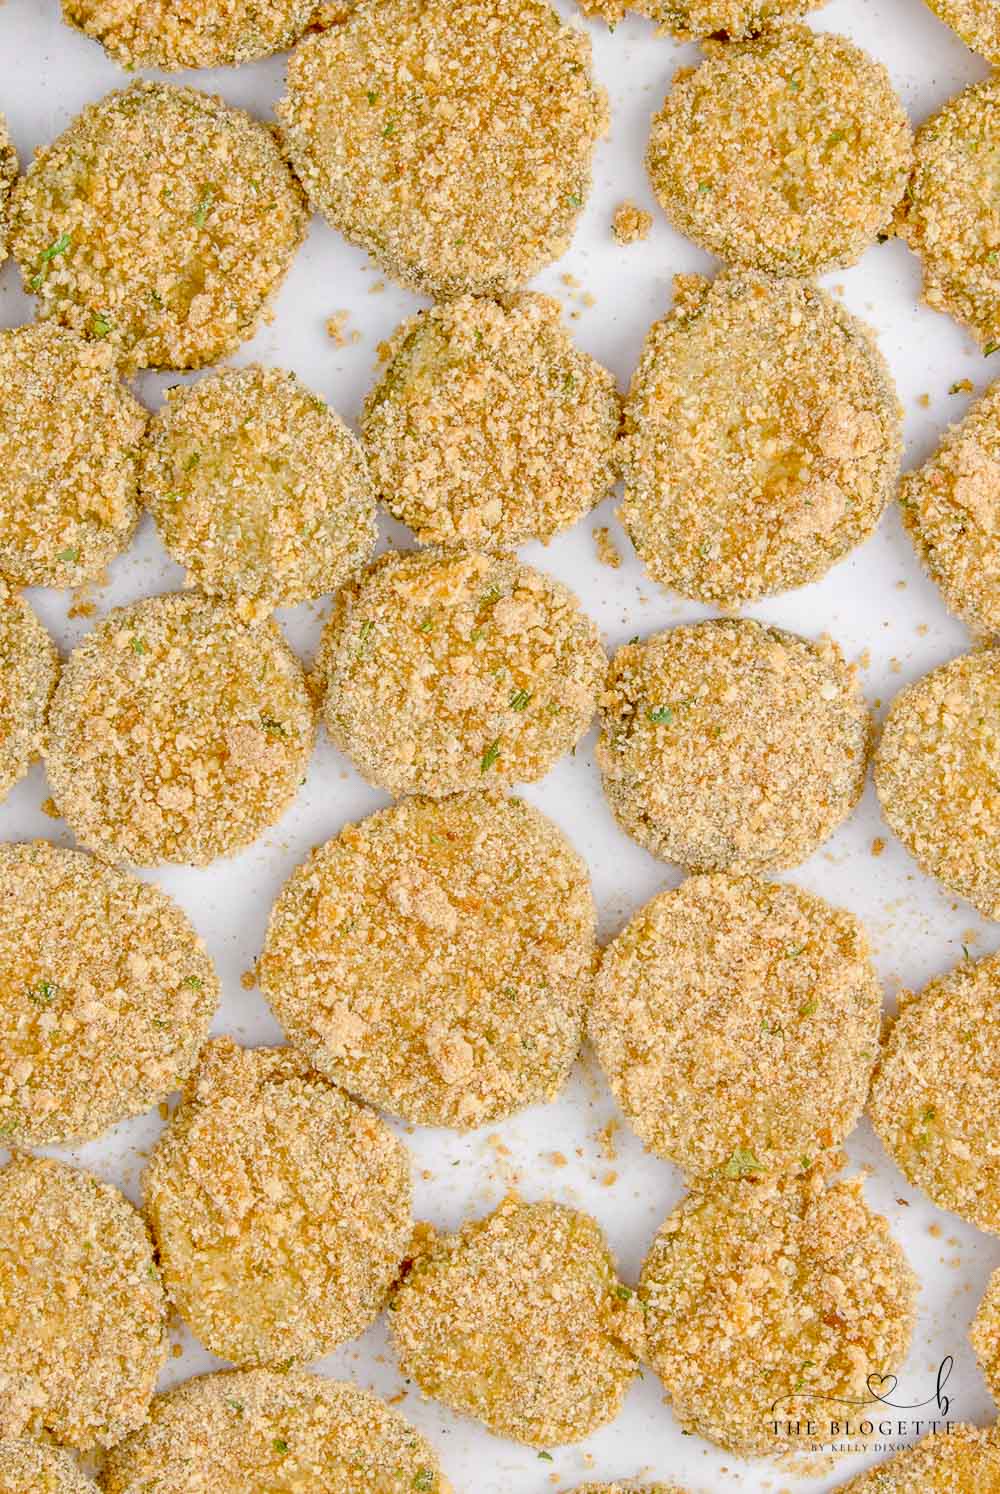 Pickle chips with breadcrumb coating